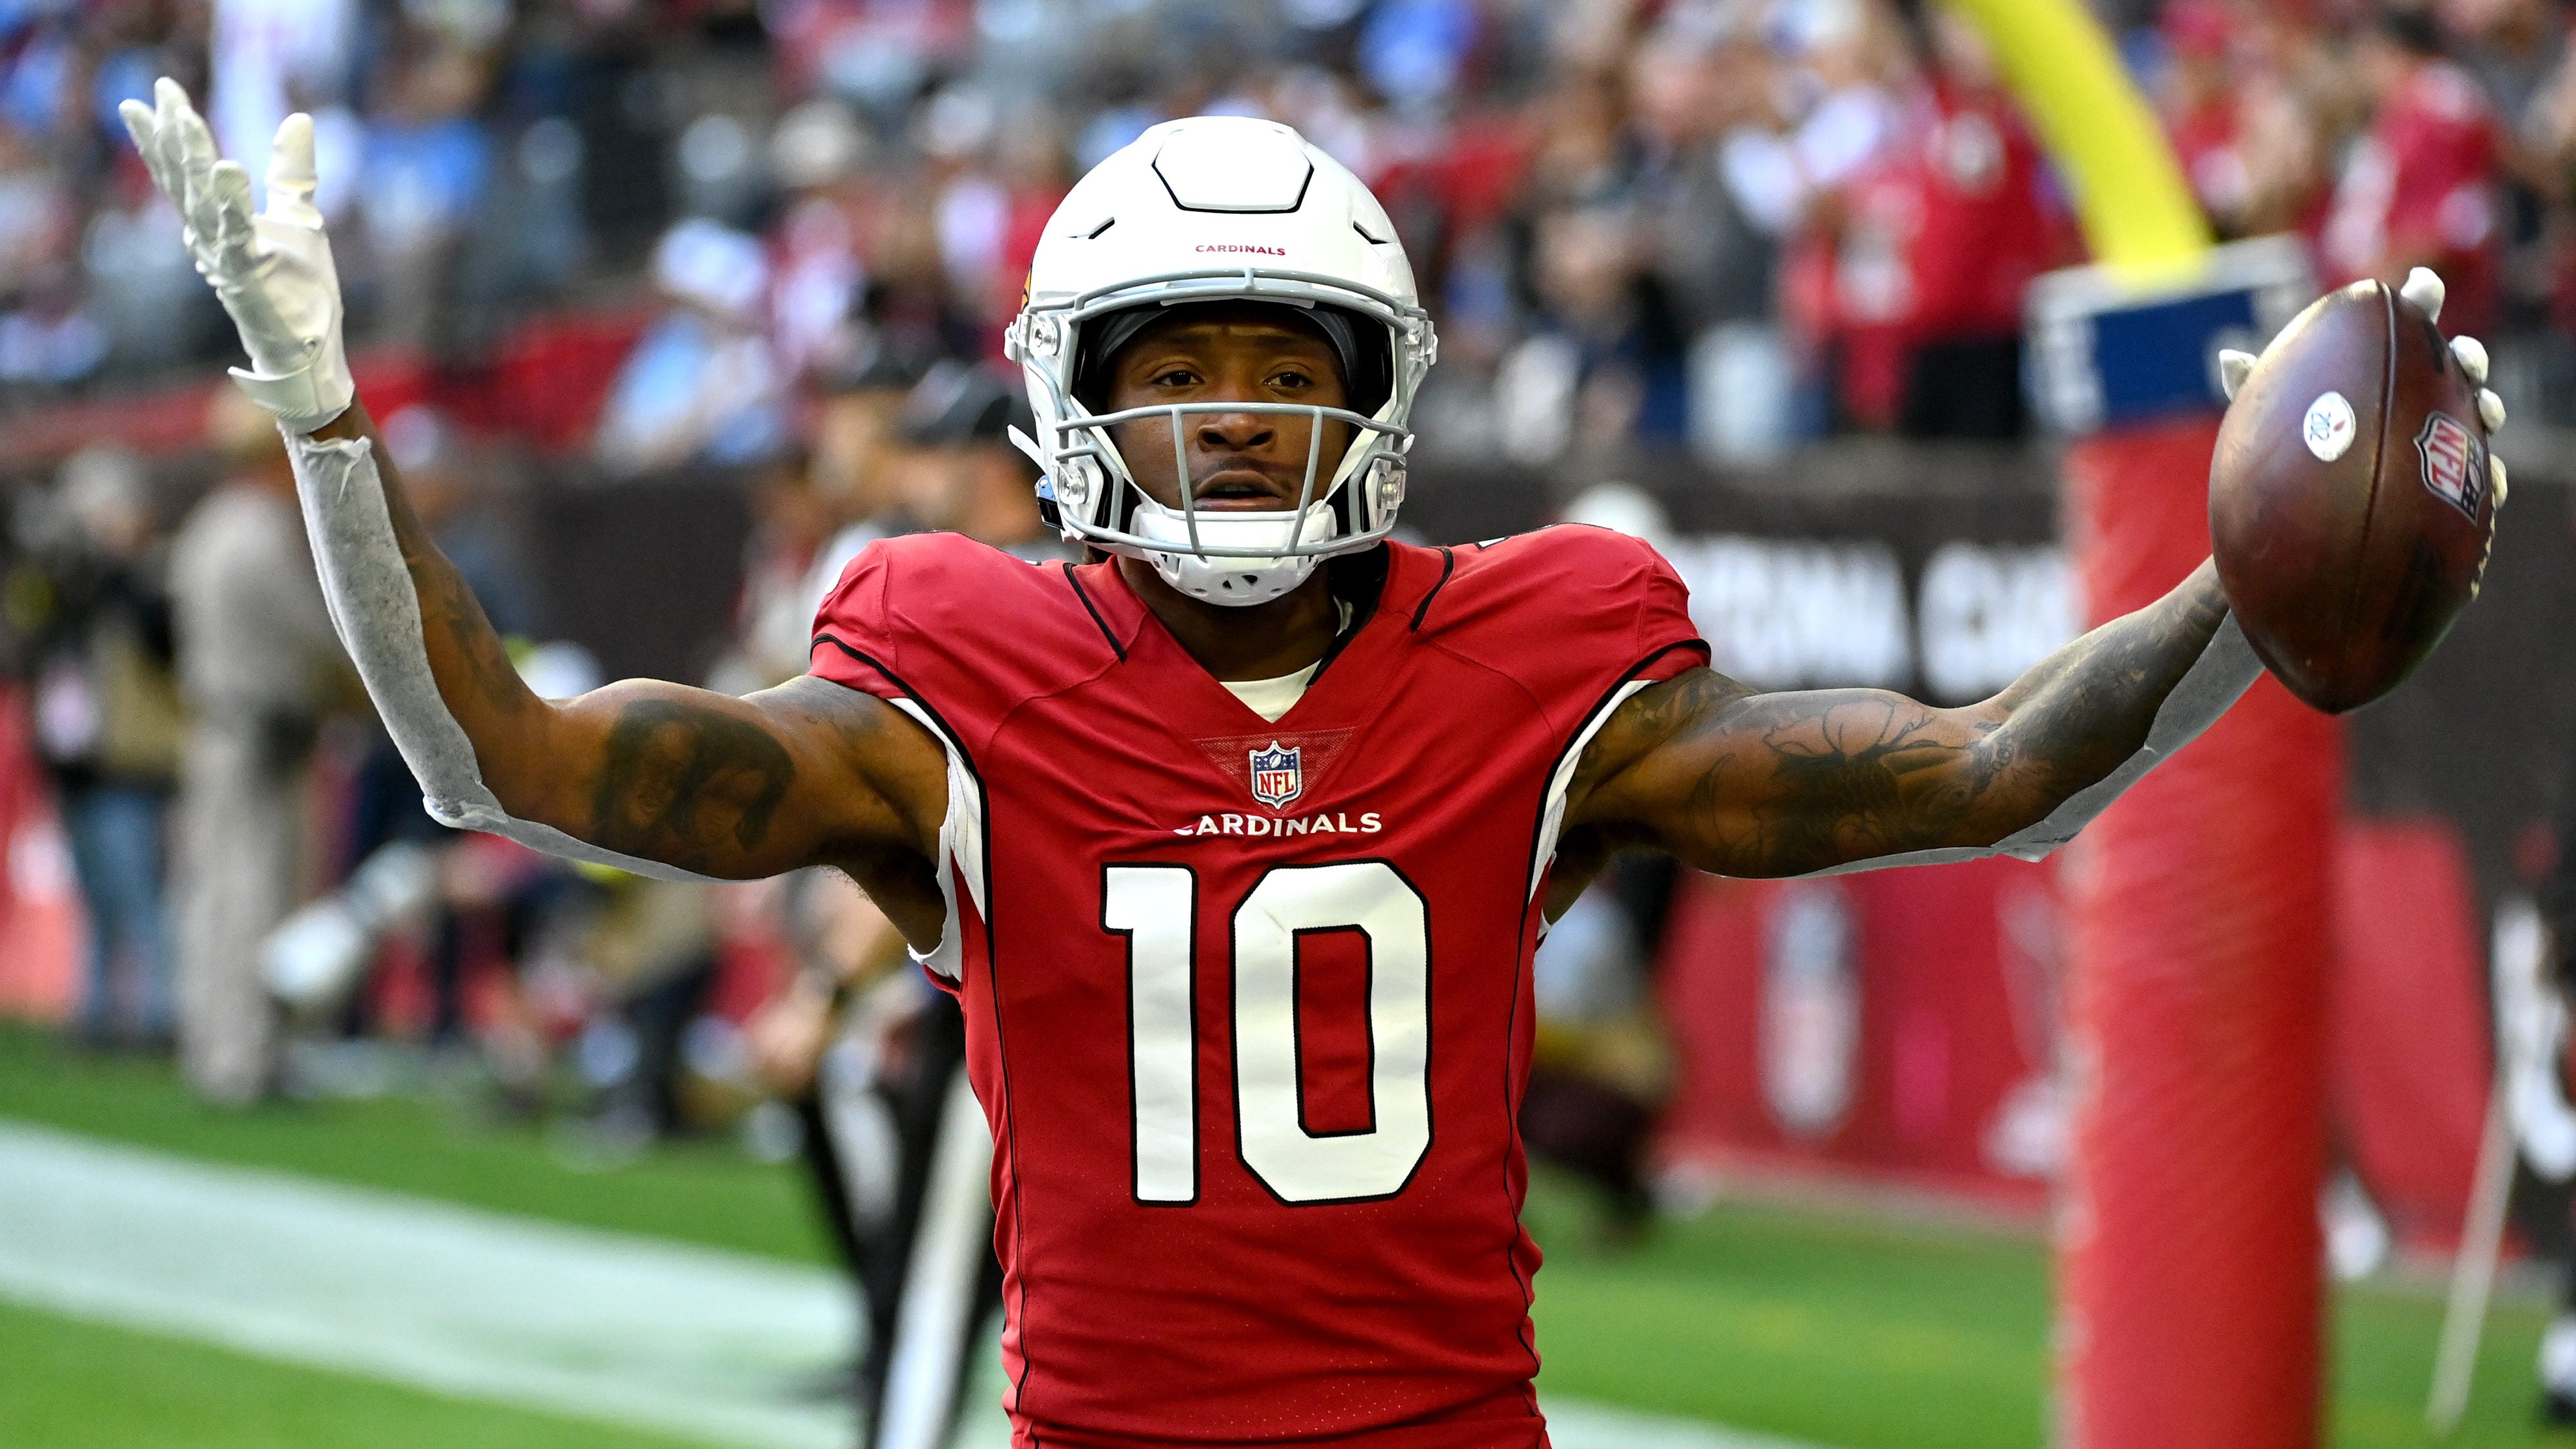 Rumor hints at possible new uniforms for the Arizona Cardinals